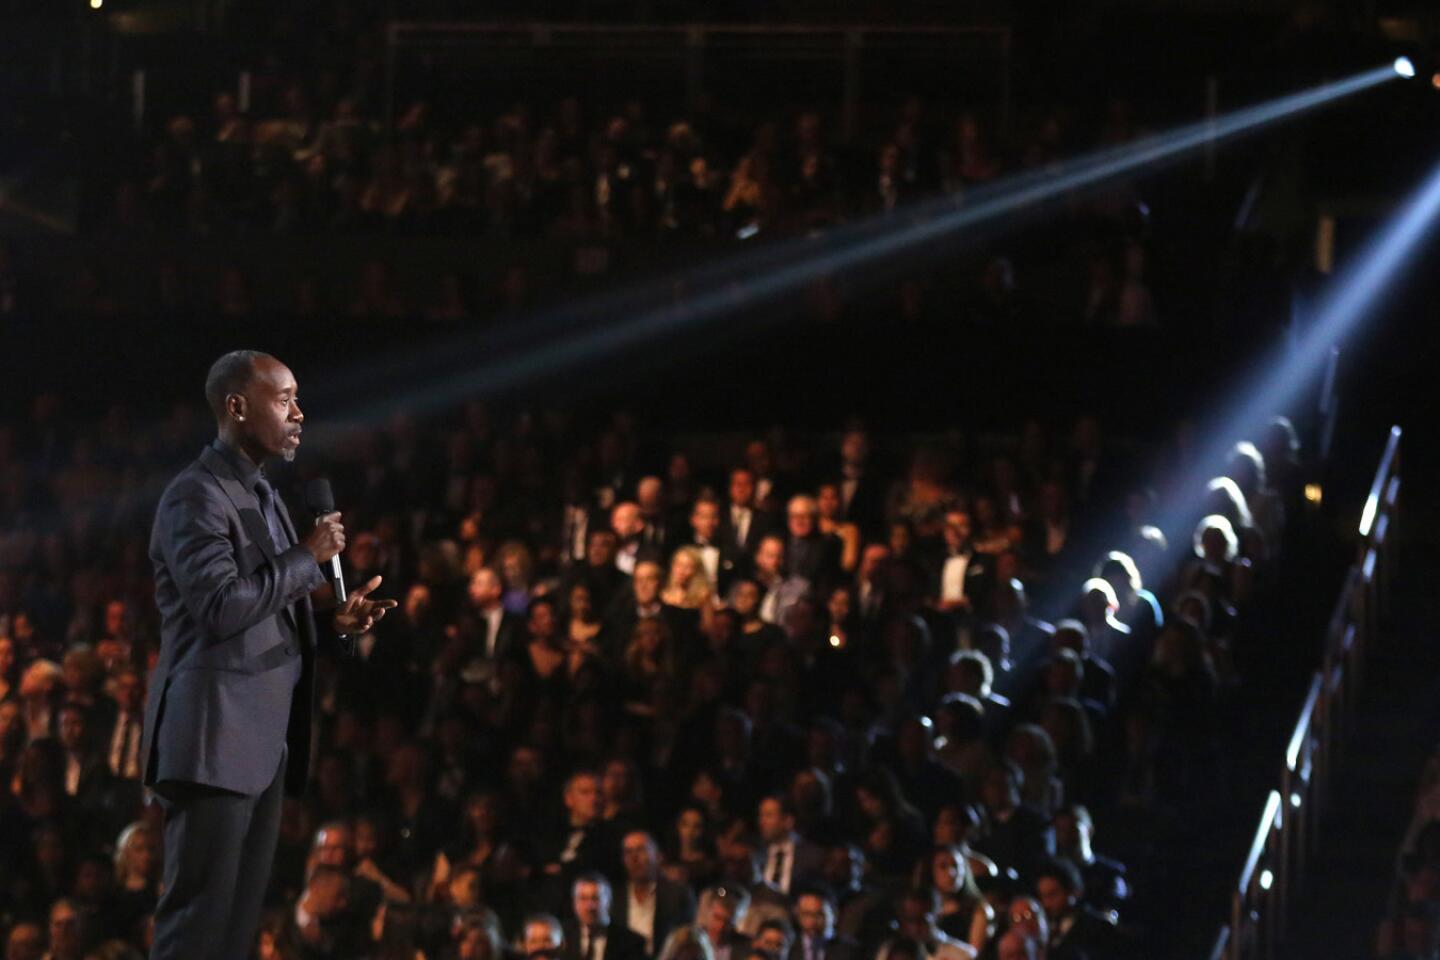 Don Cheadle introduces a performance by Kendrick Lamar.